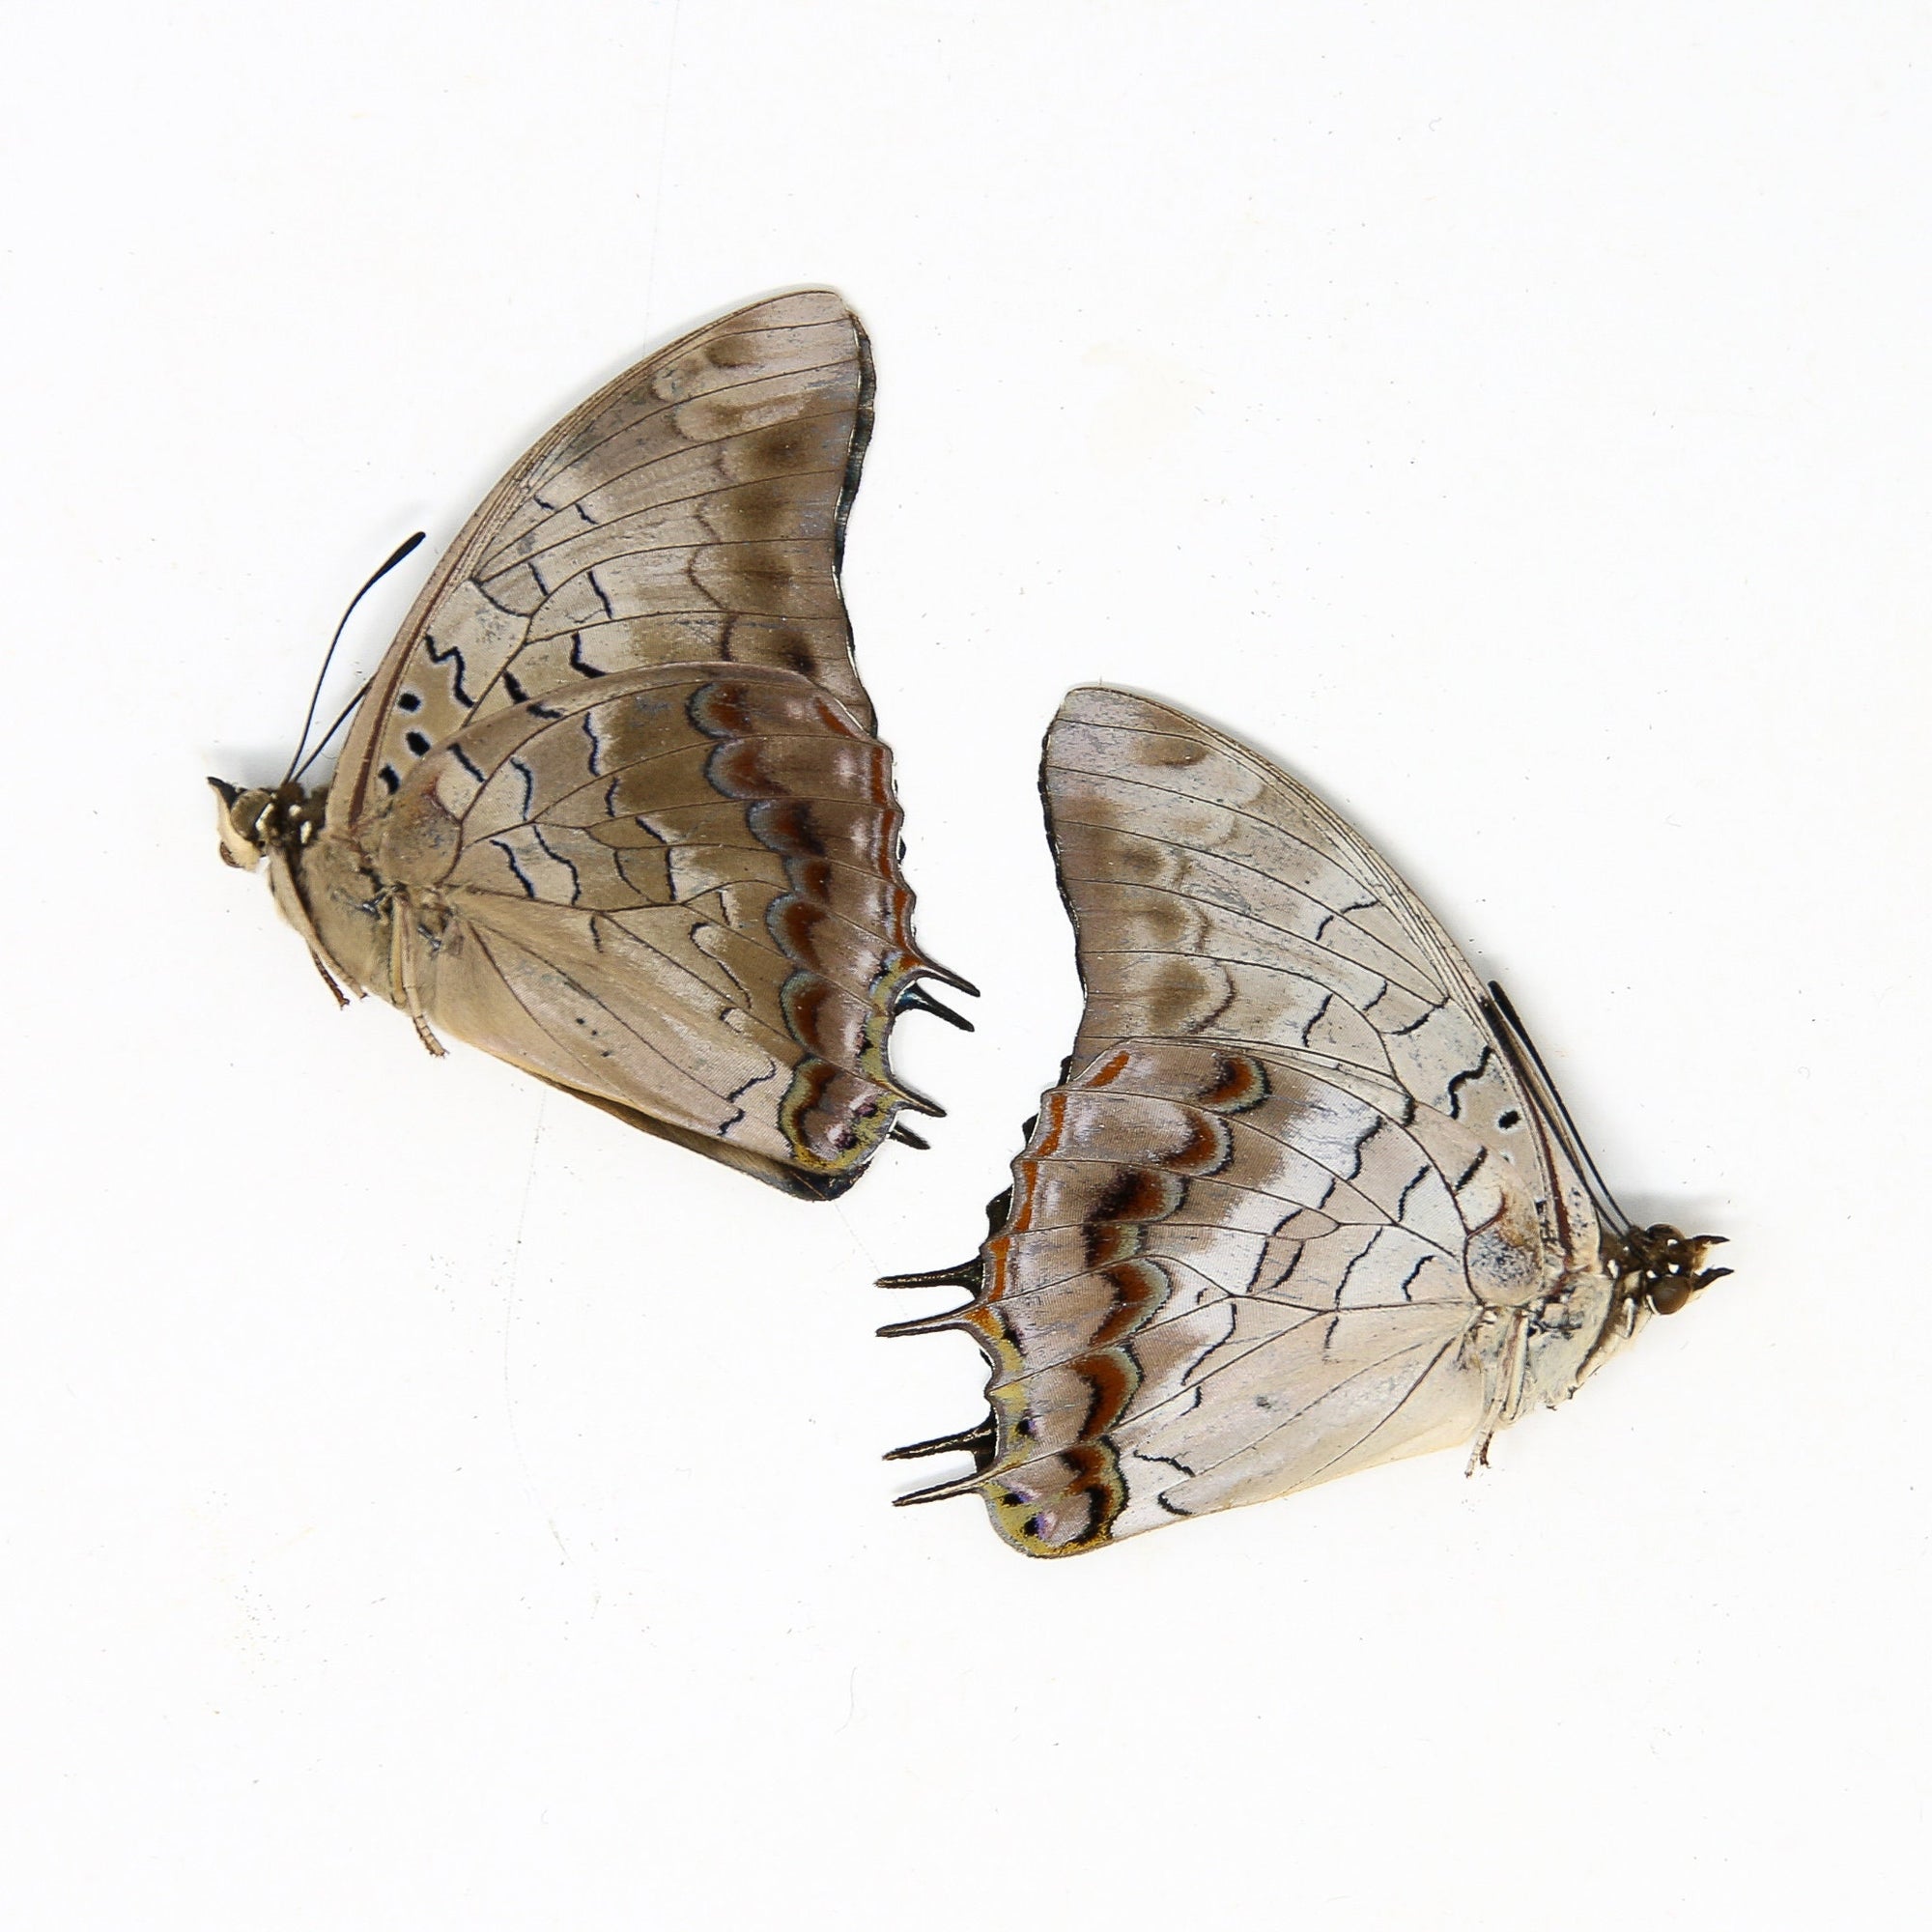 Two (2) Charaxes etheocles "Demon Charaxes" A1 Real Dry-Preserved Butterflies, Unmounted Entomology Taxidermy Specimens